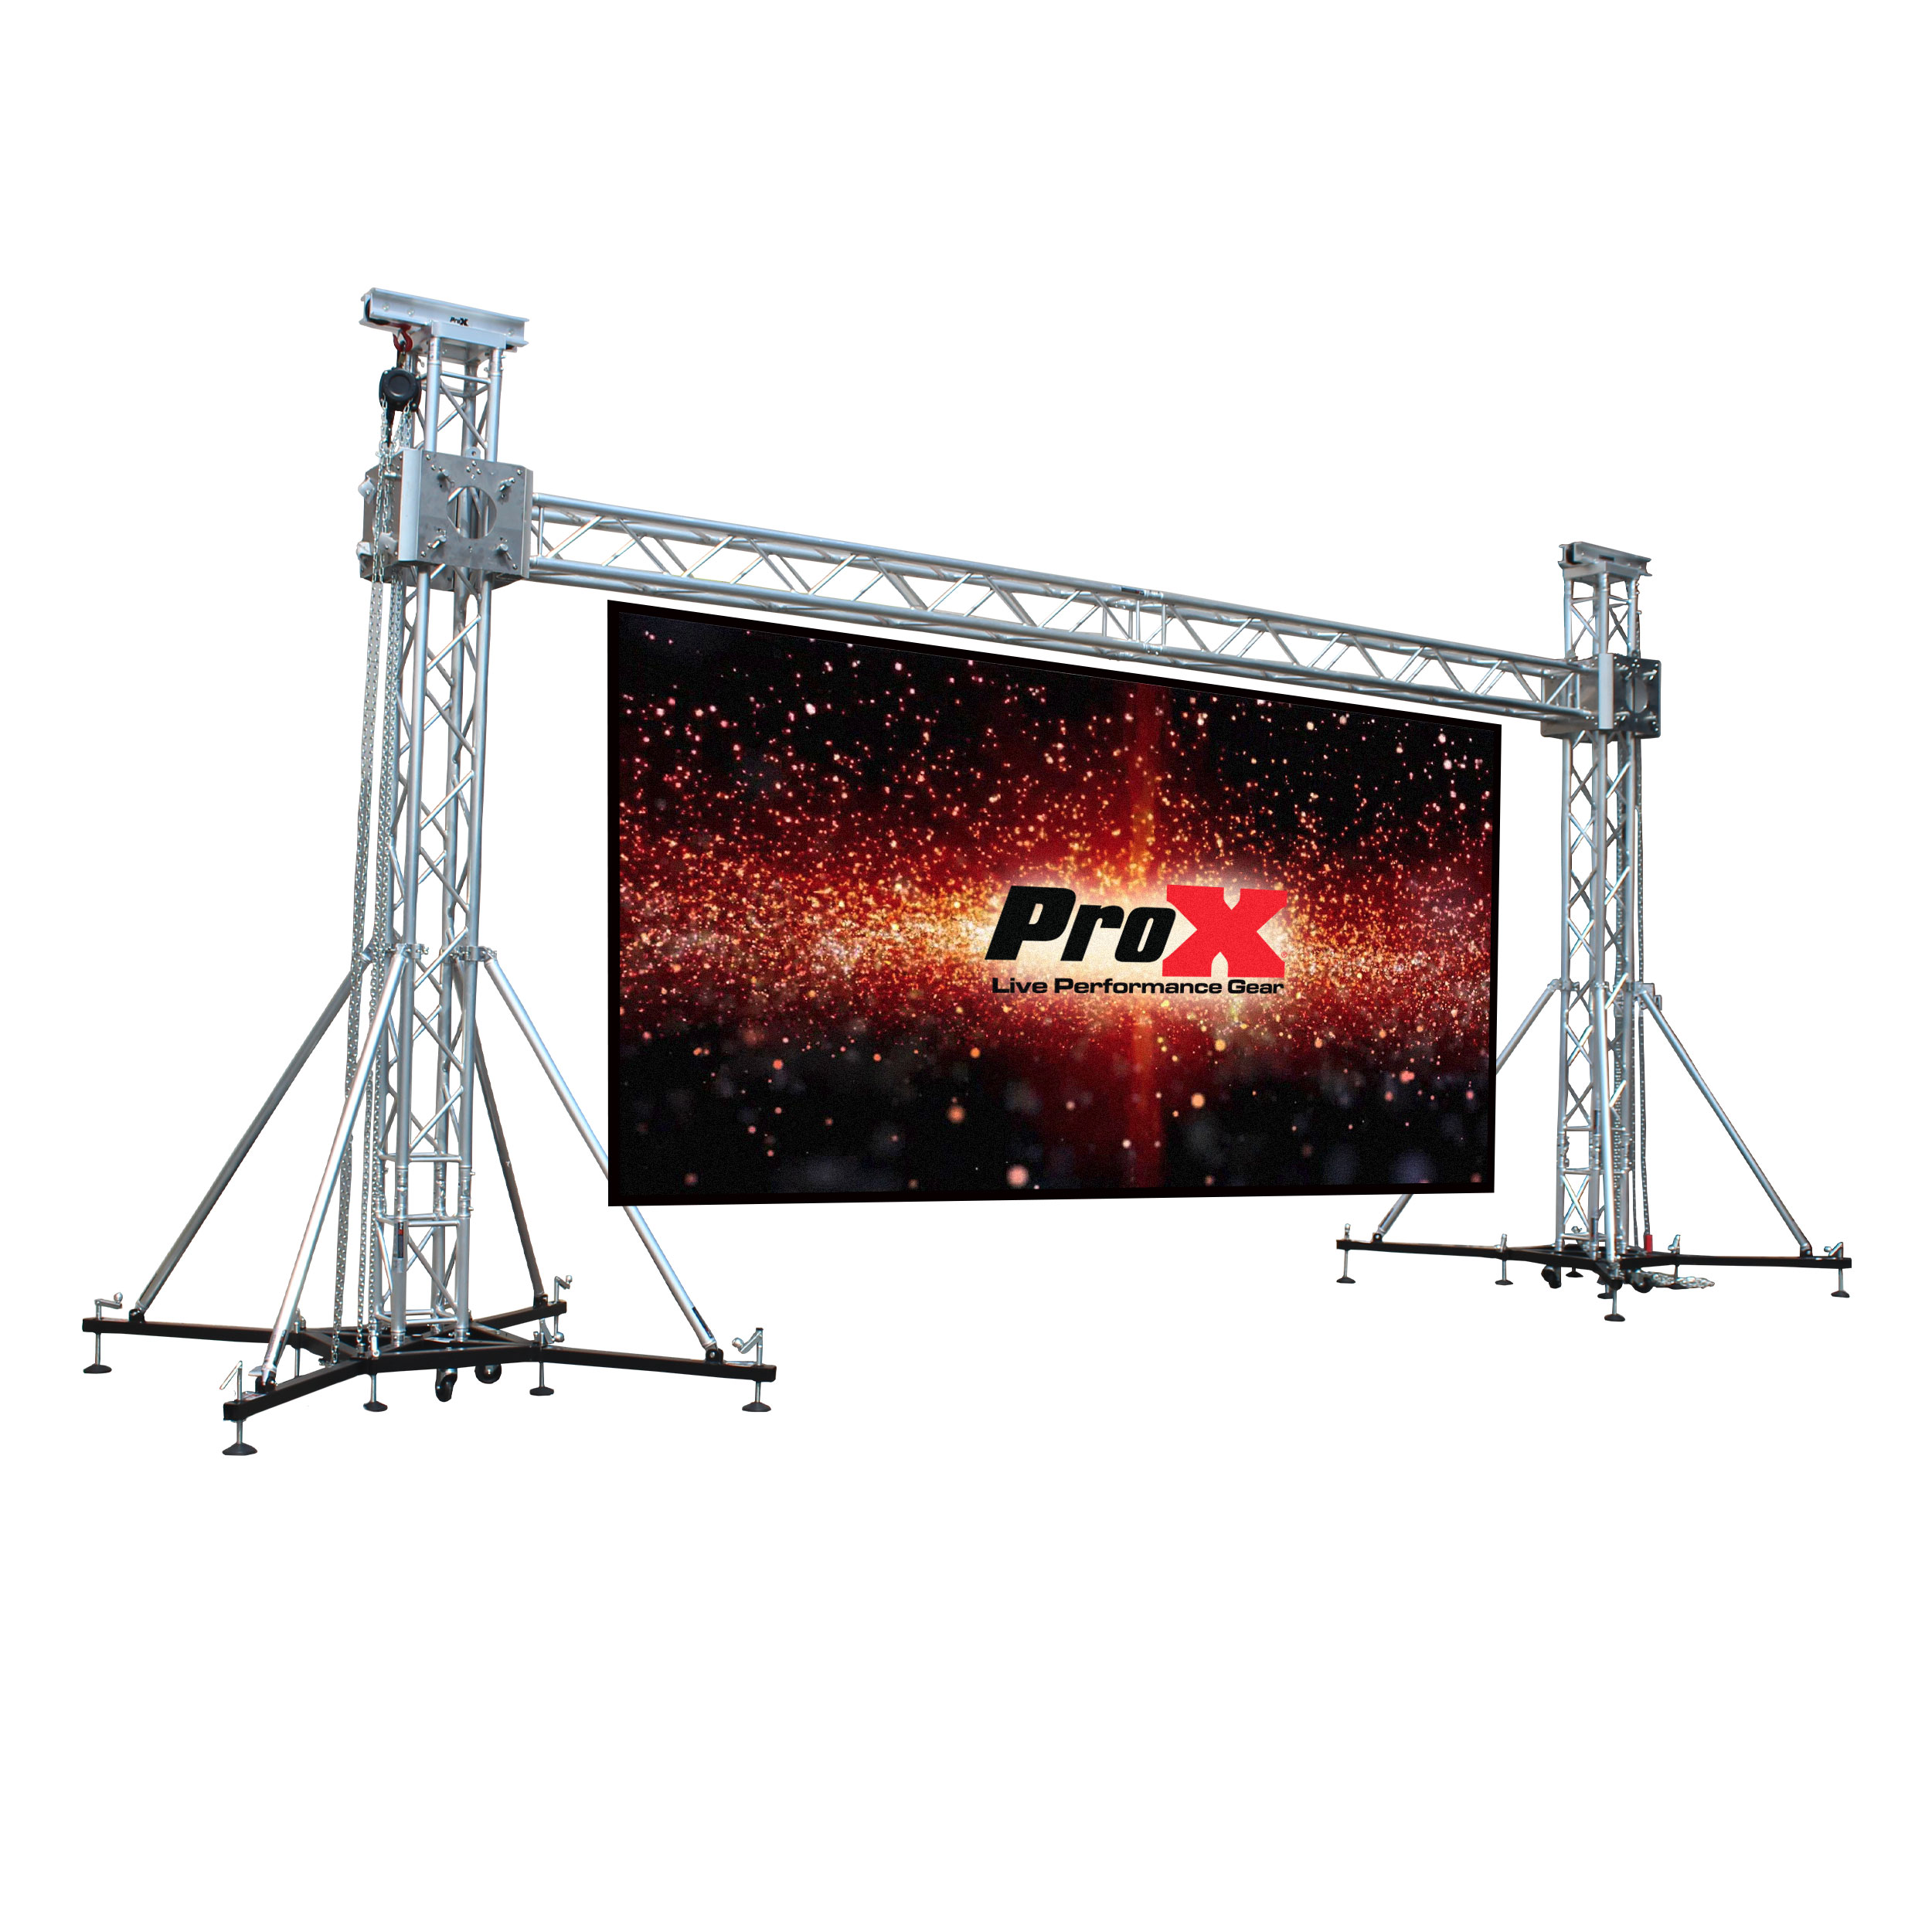 LED Screen Display Panel Video Fly Wall Truss Support System 20'W x 23'H Outdoor w/ Hoist | ProX Live Performance Gear